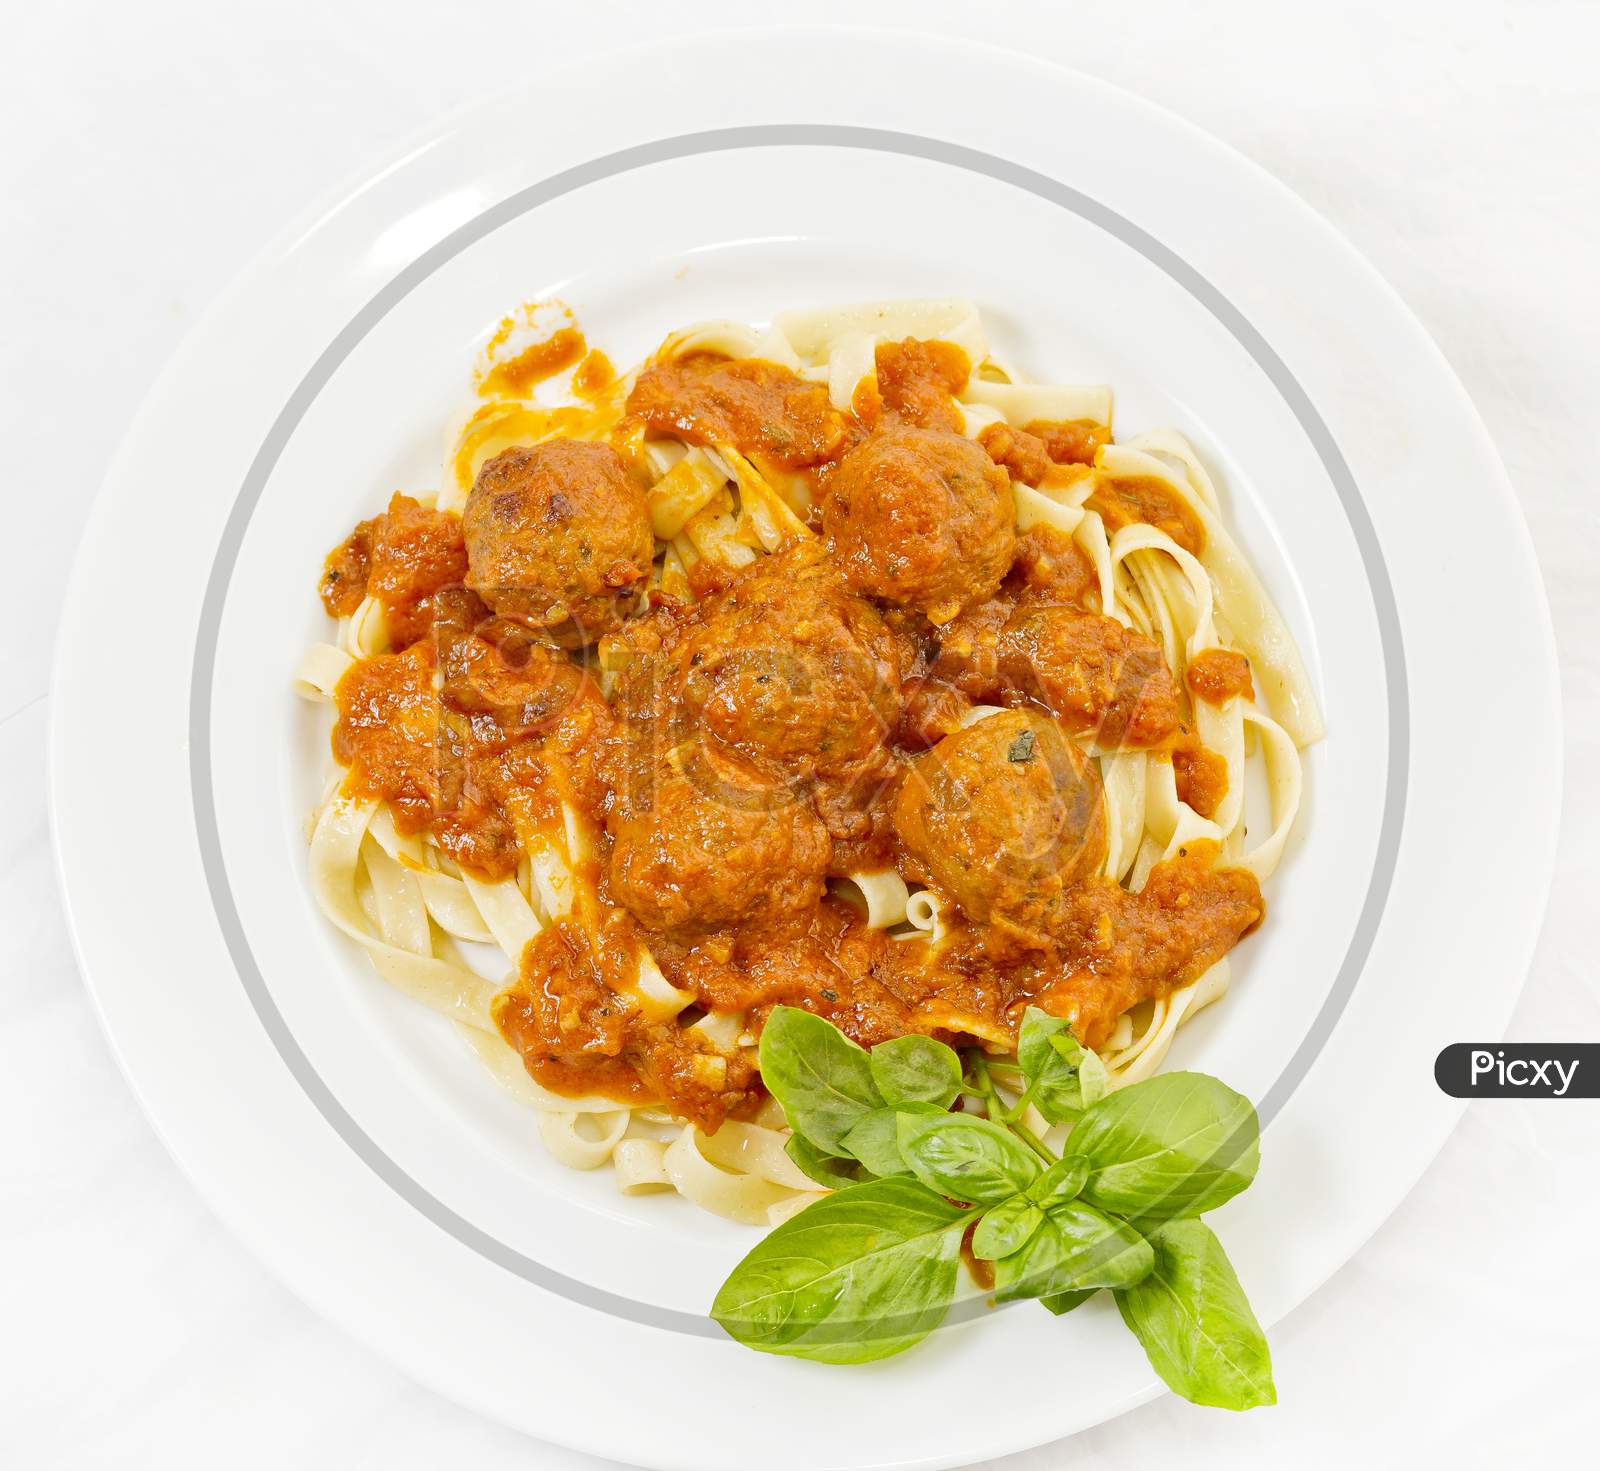 A Plate Of Fettuccine And Meatballs Pasta With Tomato Sauce.